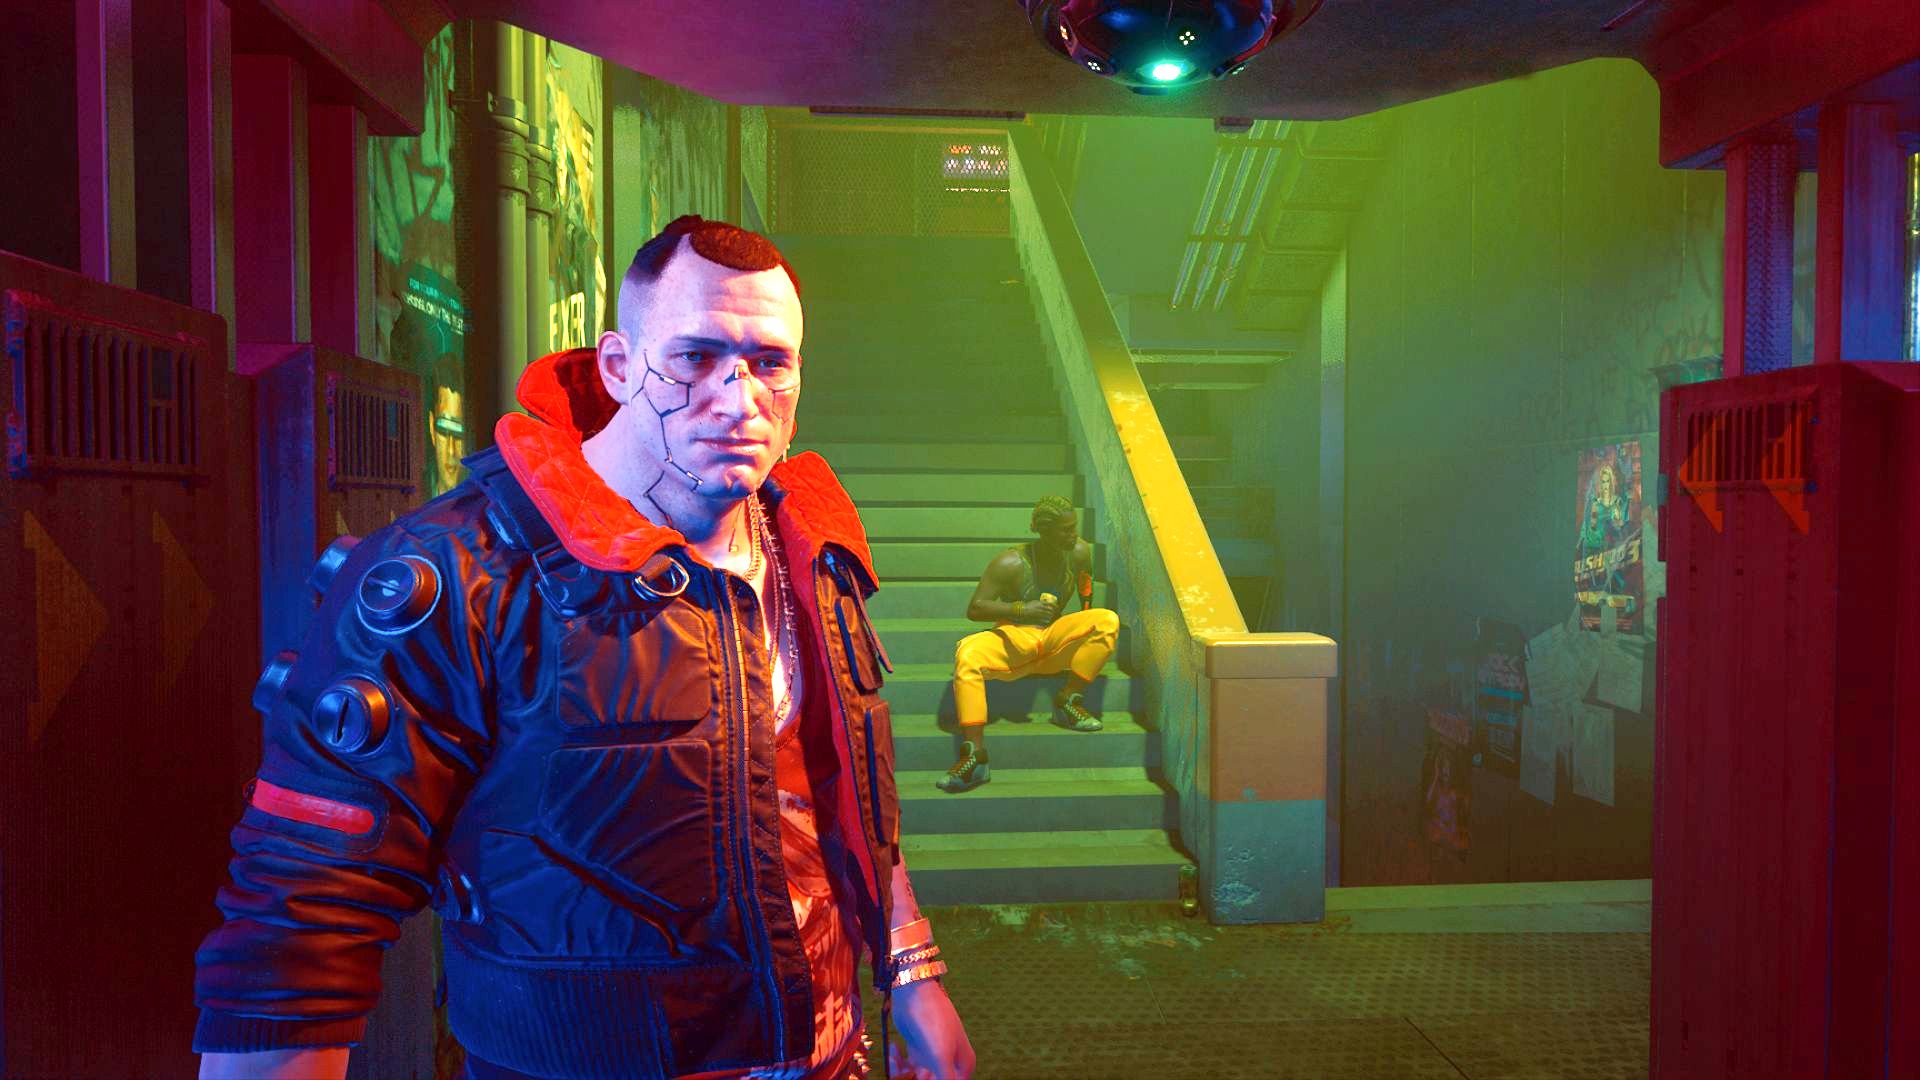 Cyberpunk 2077 got its facial animation mostly right - Polygon